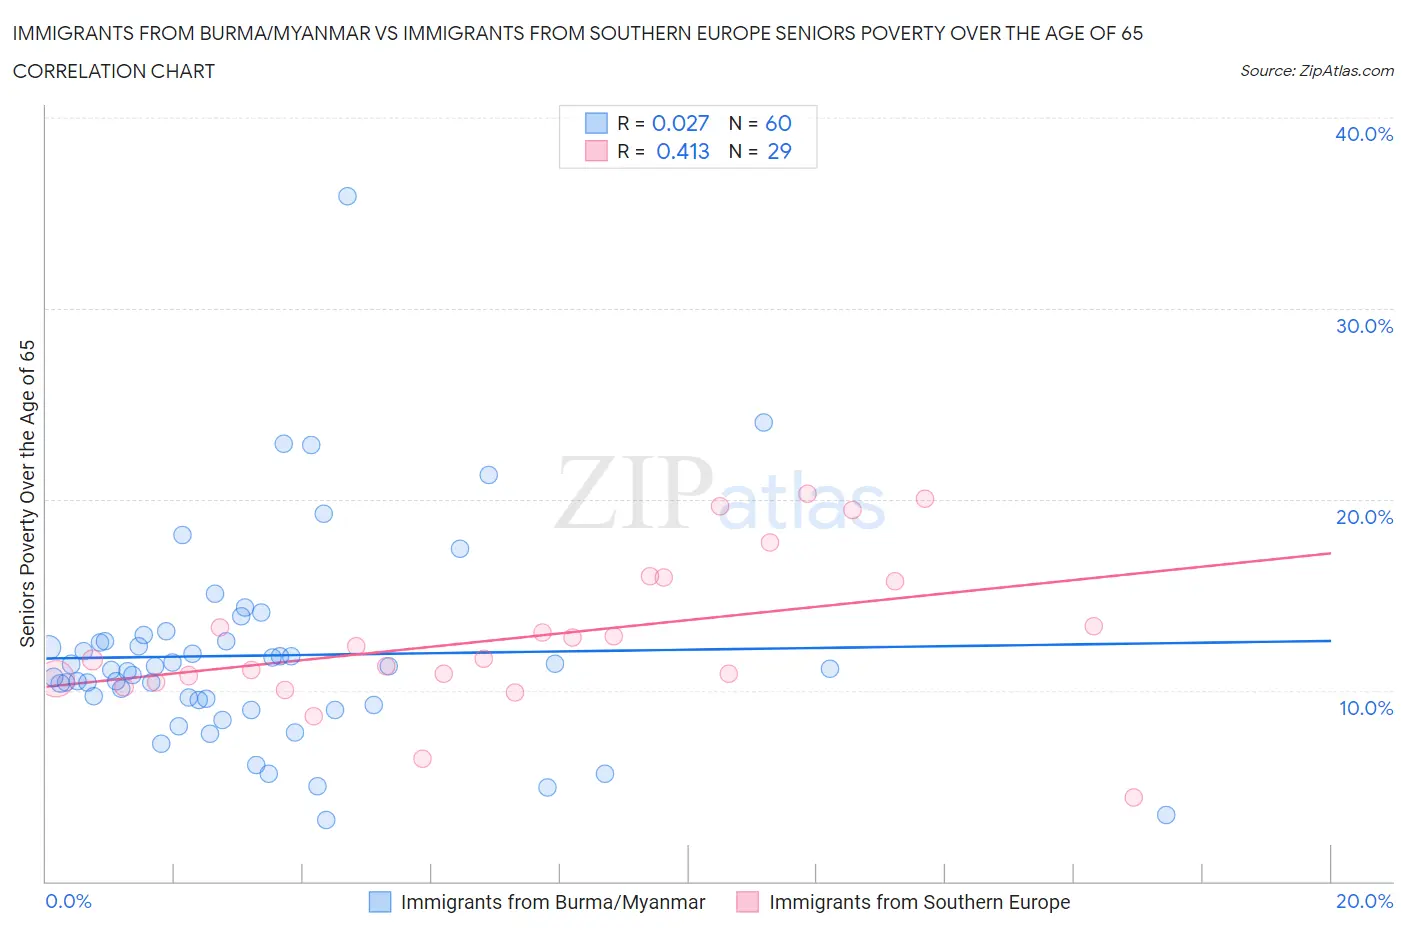 Immigrants from Burma/Myanmar vs Immigrants from Southern Europe Seniors Poverty Over the Age of 65